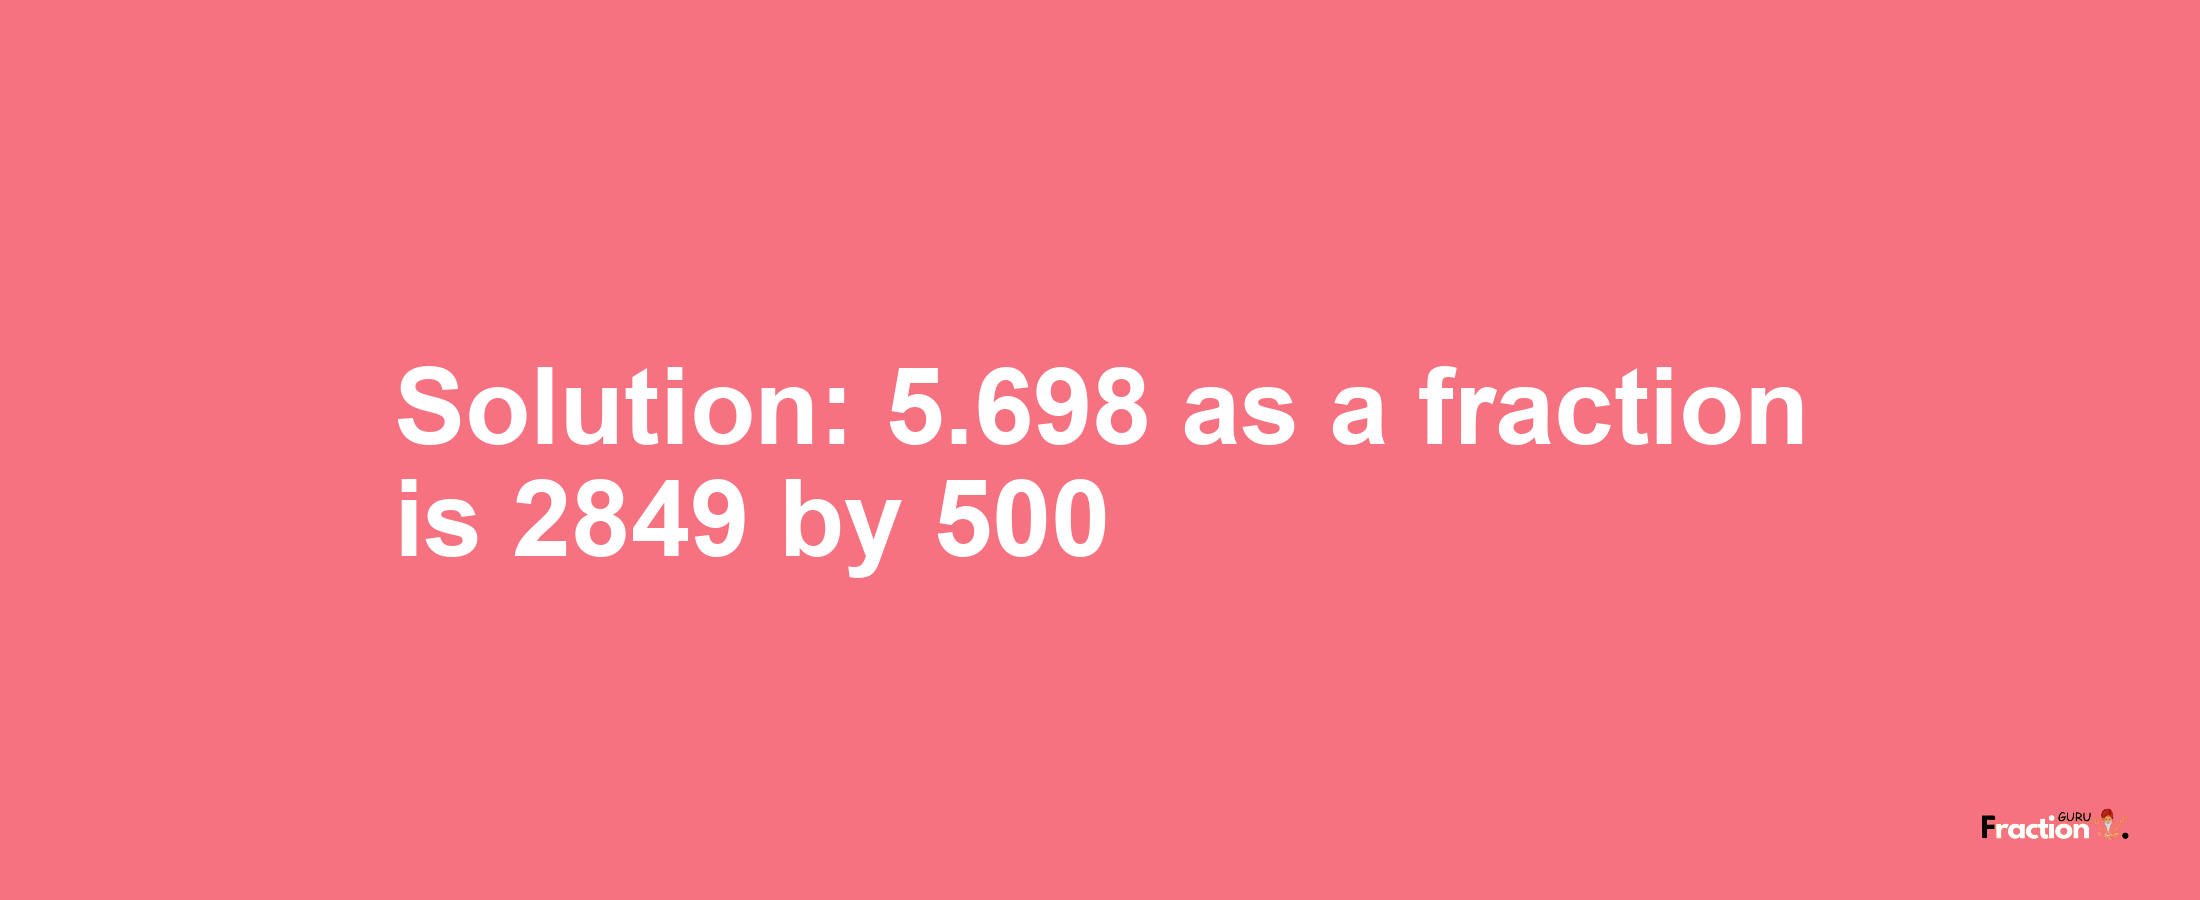 Solution:5.698 as a fraction is 2849/500